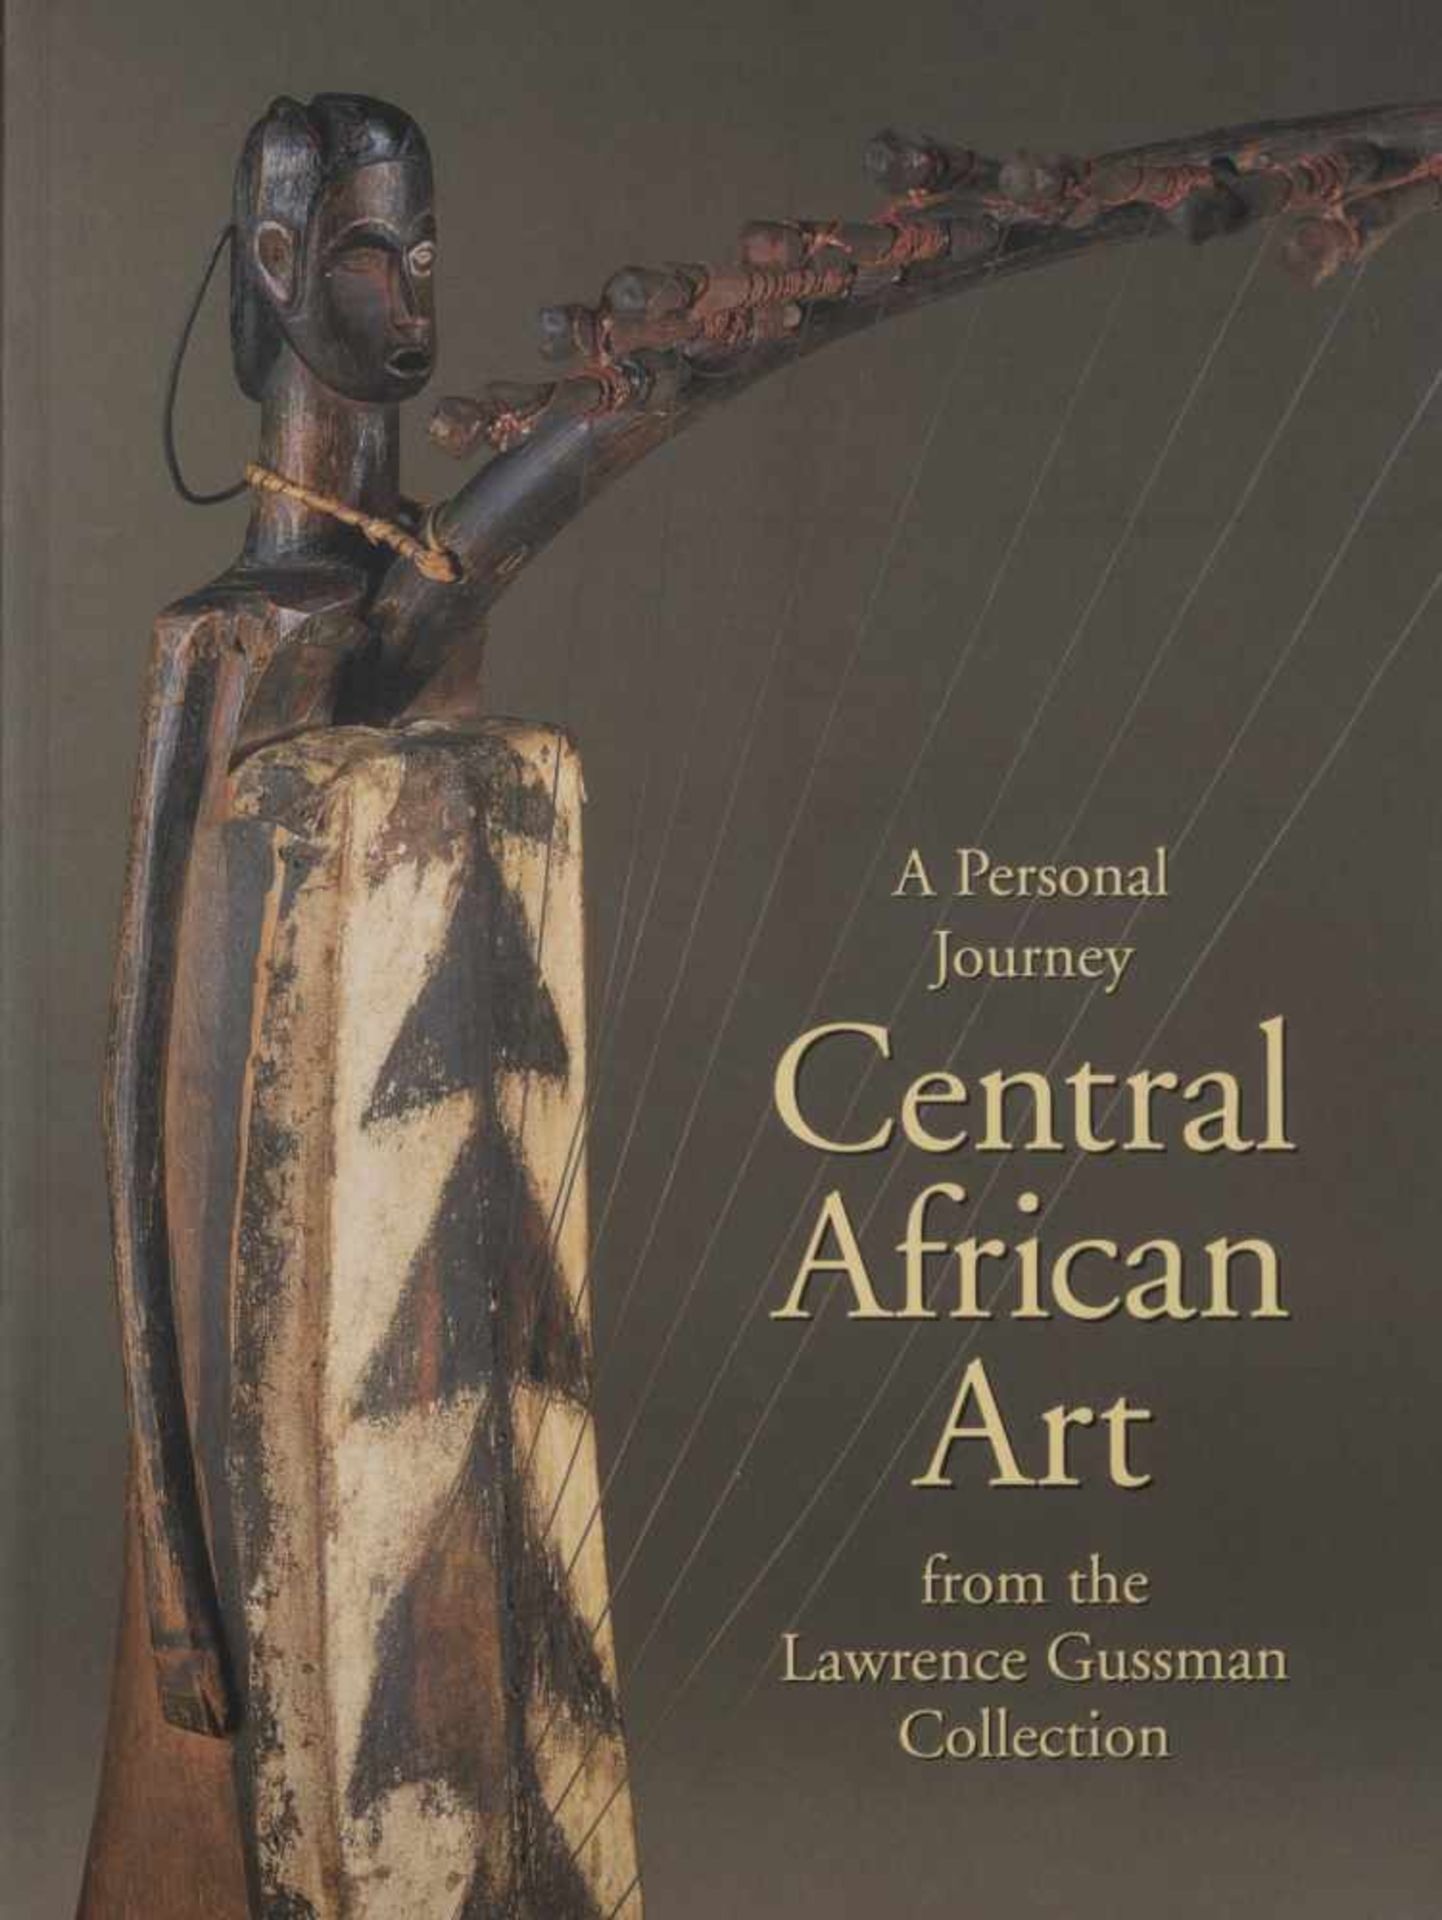 Christa Clarke, A Personal Journey: Central African Art, 2001